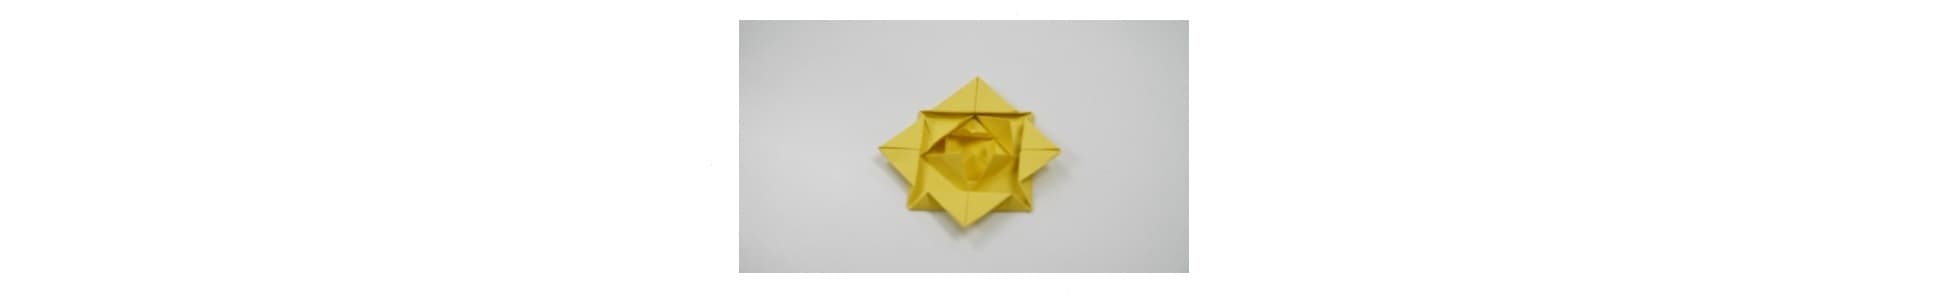 Origami Bow